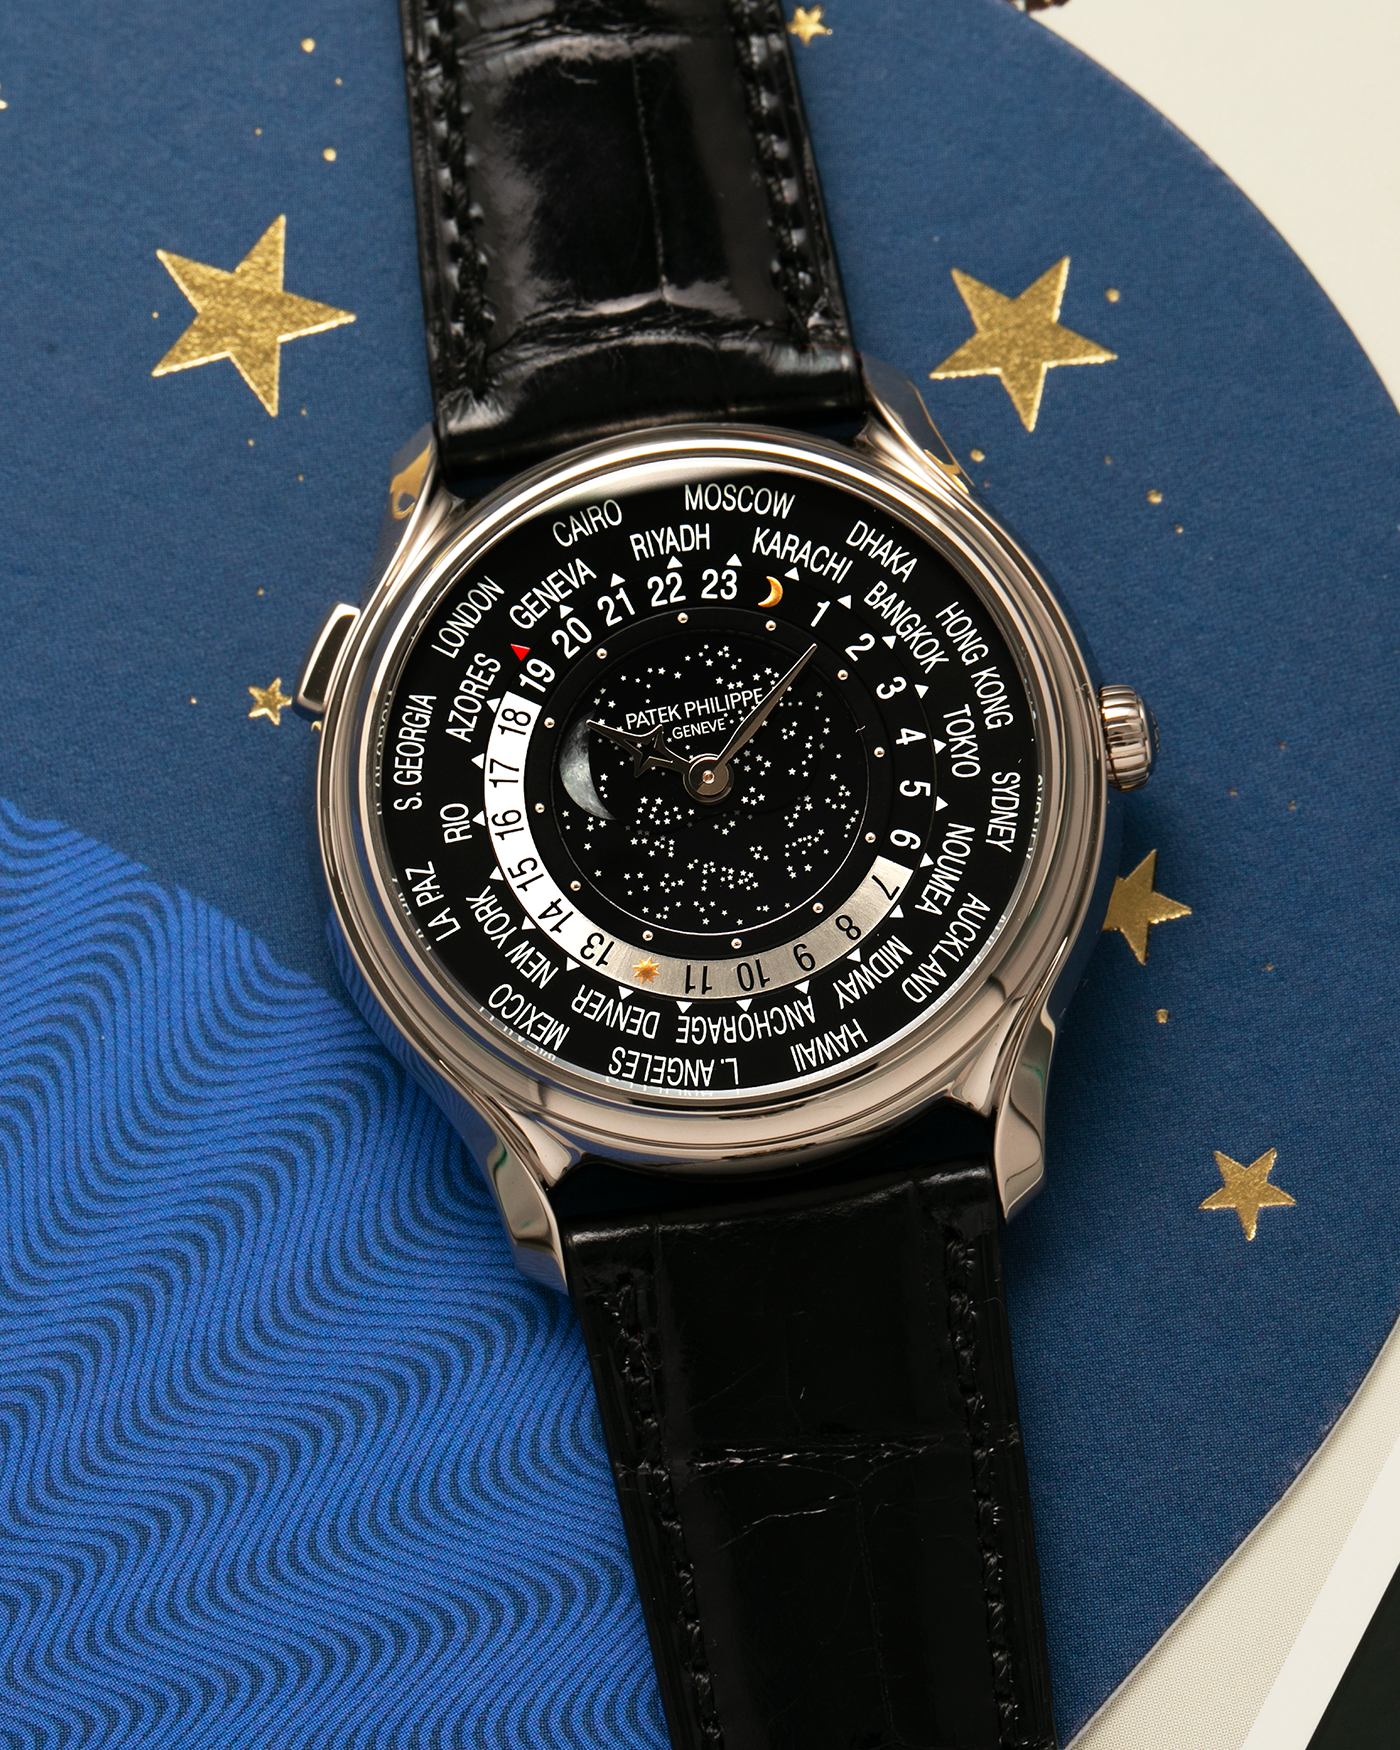 Brand: Patek Philippe Year: 2015 Model: World Time Moon, Limited Edition of 1300 pieces Reference Number: 5575G Material: 18-carat White Gold Movement: Patek Philippe Cal. 240 HU LU Micro-Rotor, Self-Winding Case Diameter: 40mm Lug Width: 20mm Strap: Patek Philippe Black Alligator Leather Strap with Signed / Engraved 18-carat White Gold Deployant Clasp